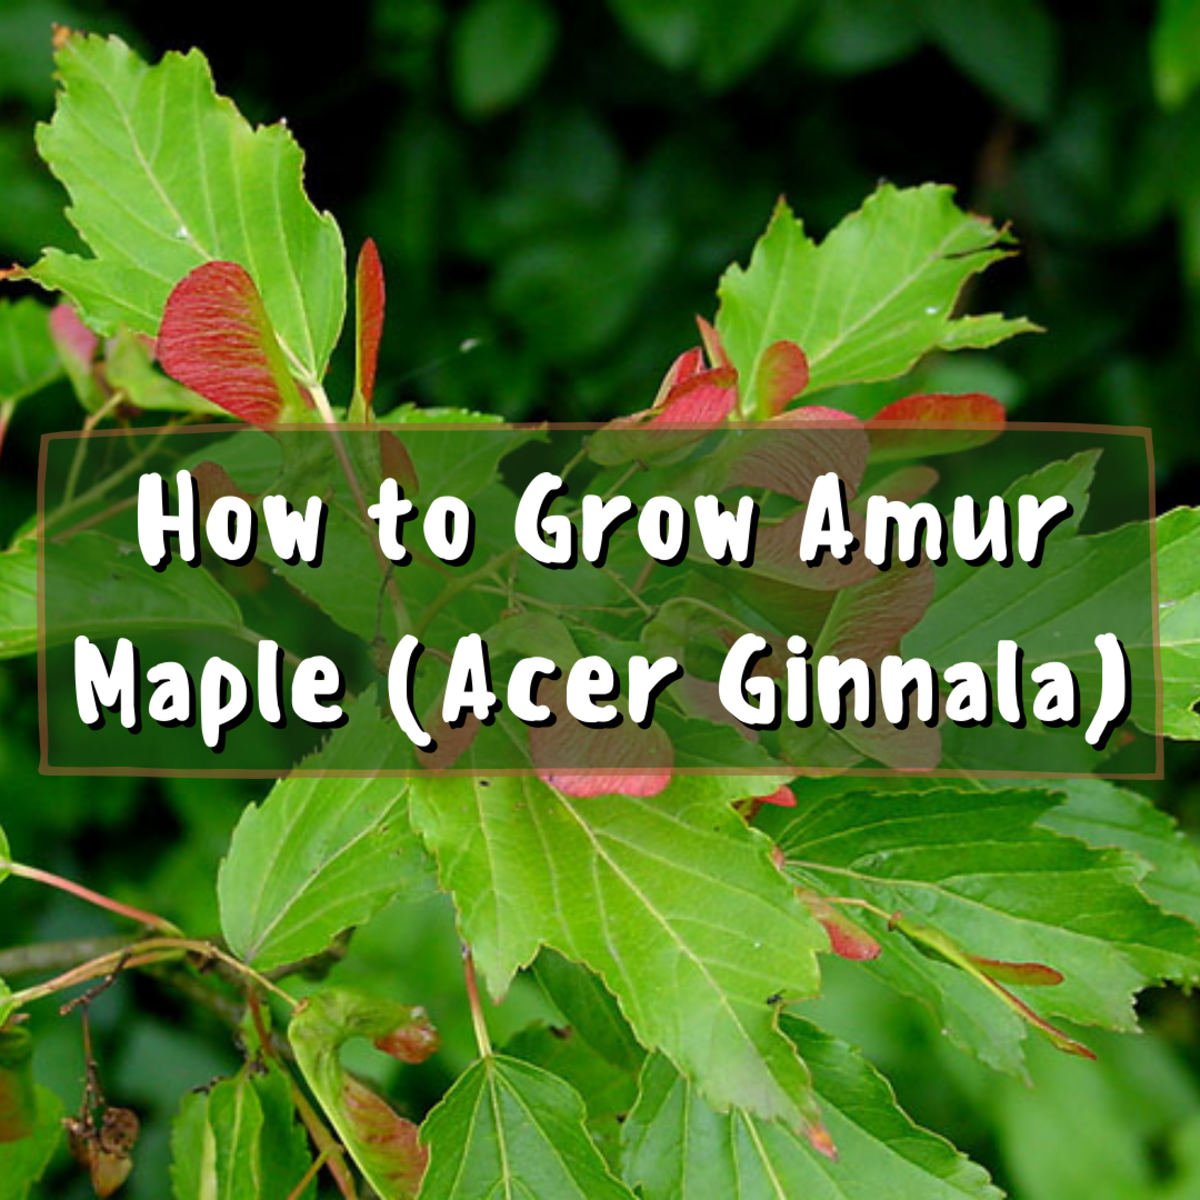 Learn how to grow Amur maple (Acer ginnala) and care for it. Amur maple is a deciduous shrub native to northeastern Asia, which can be pruned into various shapes, ranging from a tall tree to a small bonsai.